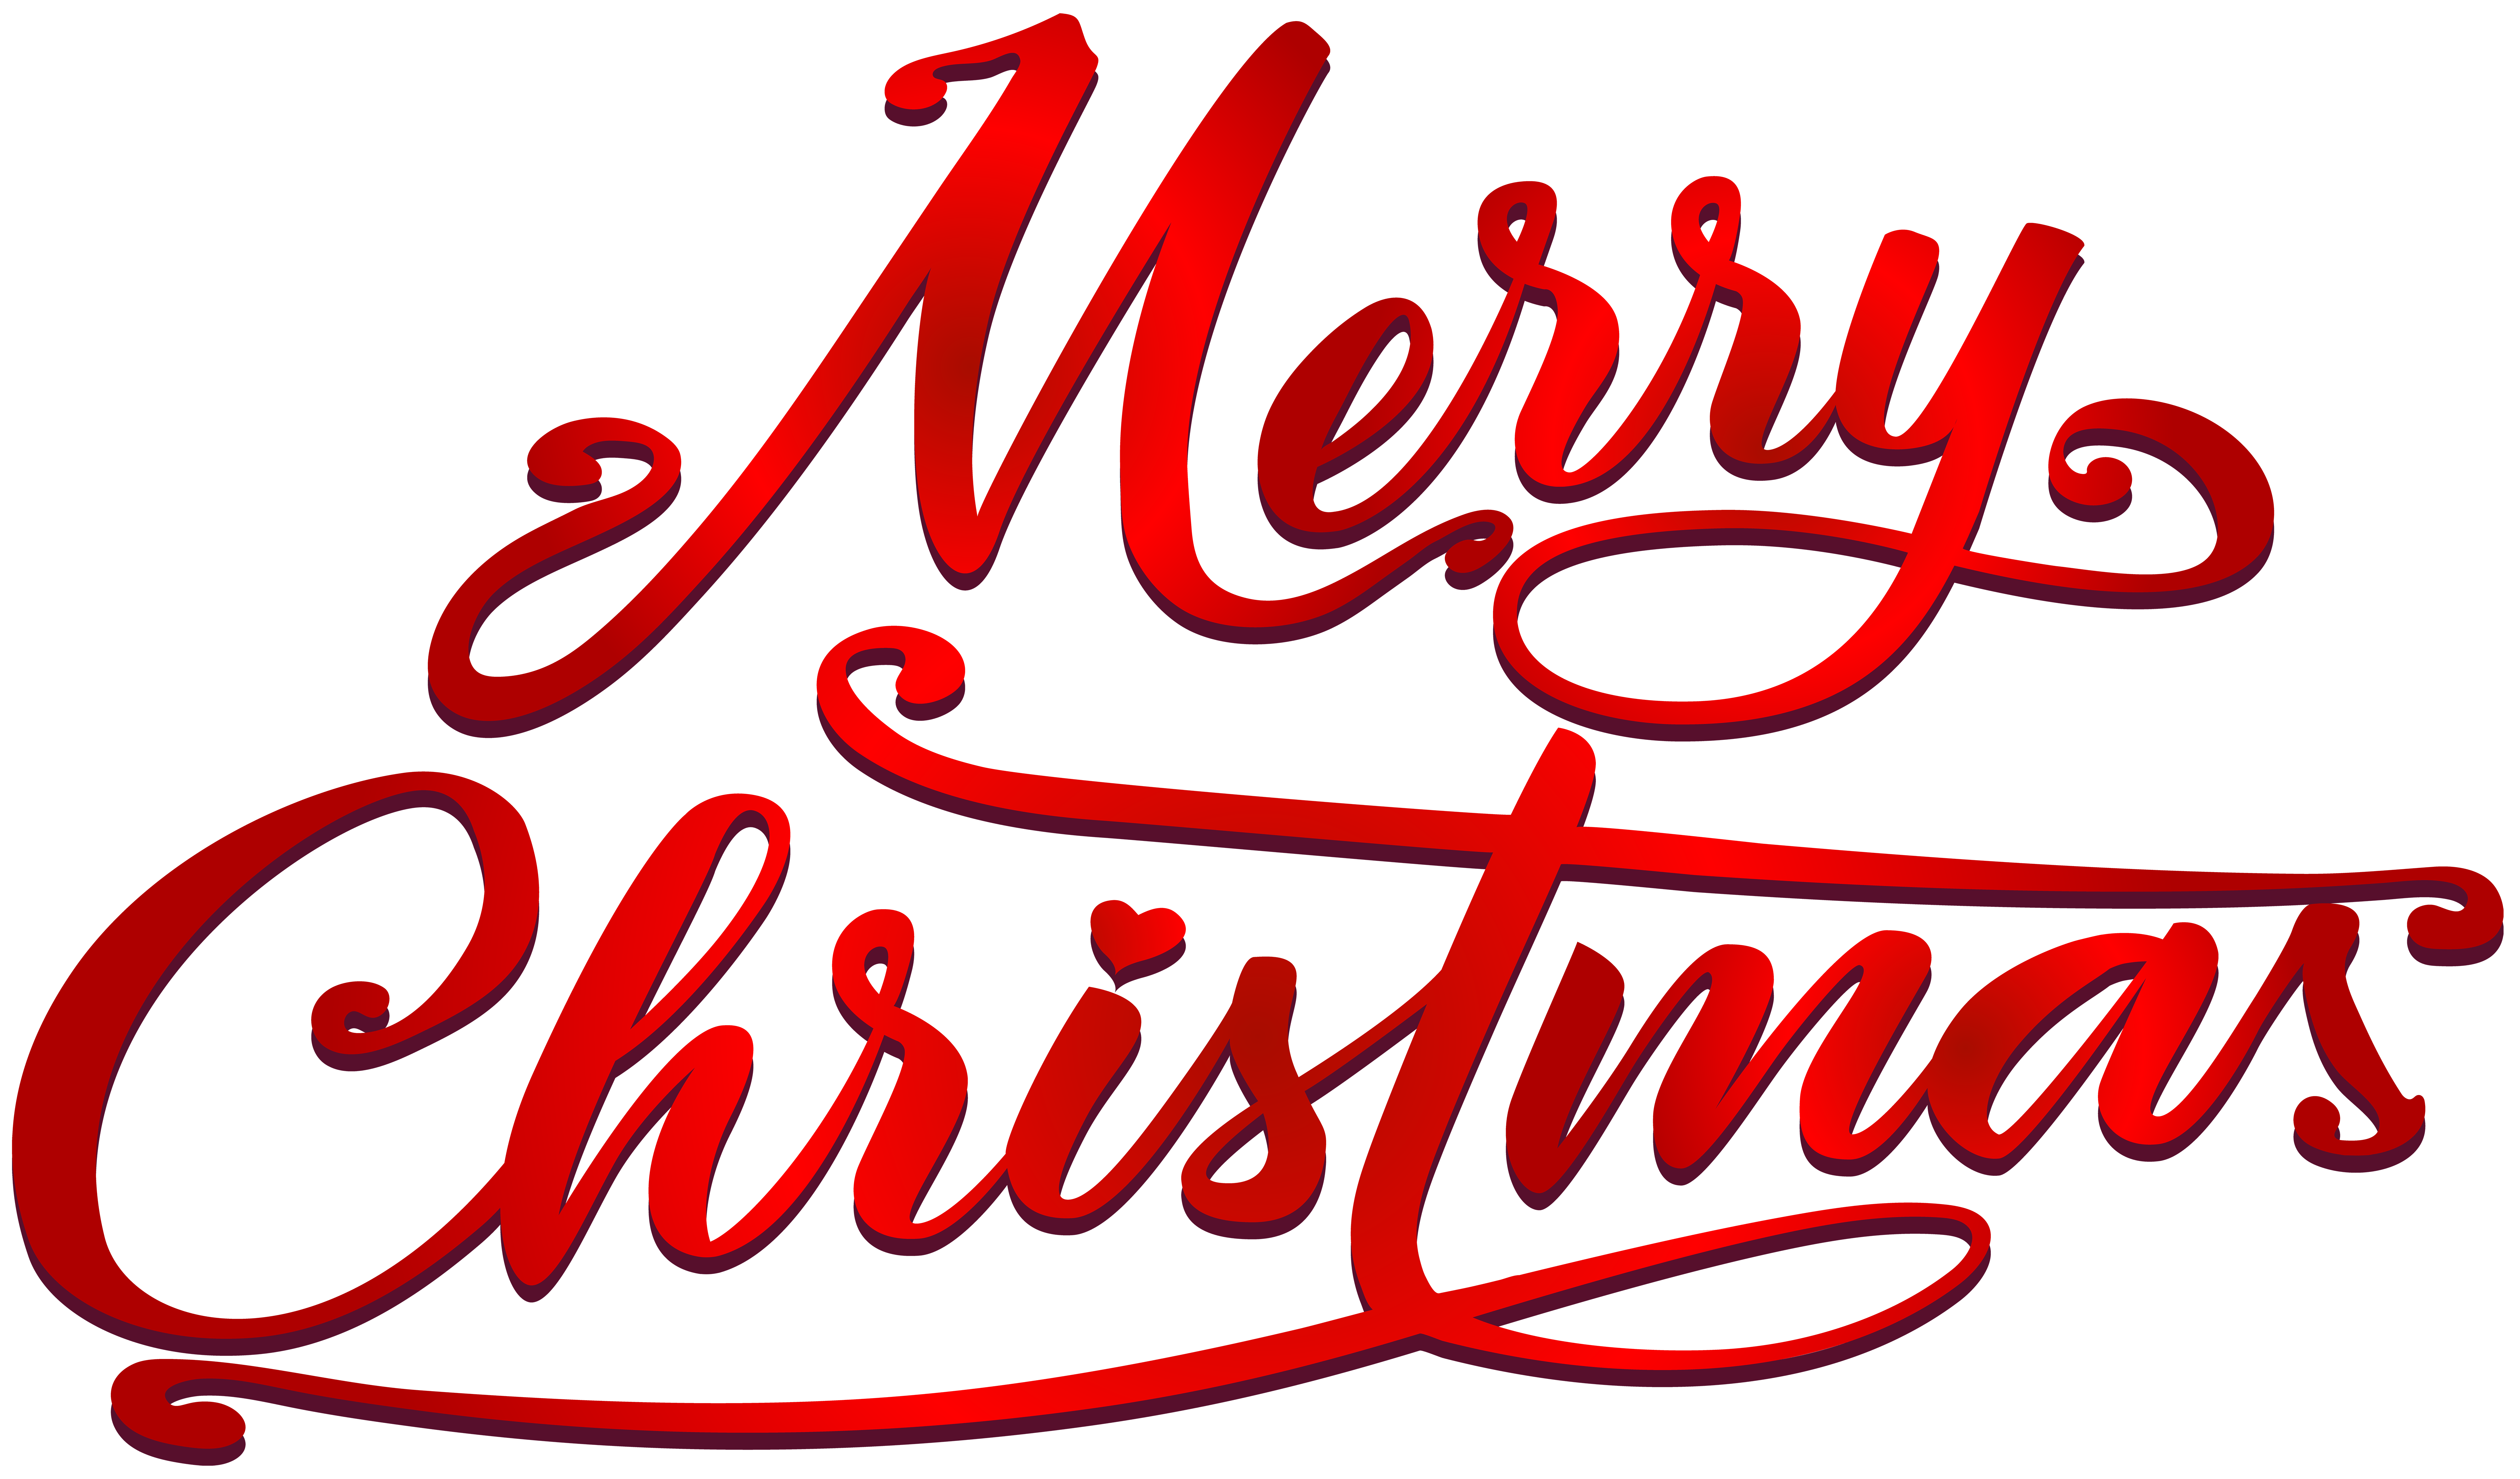 Merry Christmas Text Png Clip Art Image Gallery Yopriceville High Quality Images And Transparent Png Free Clipart